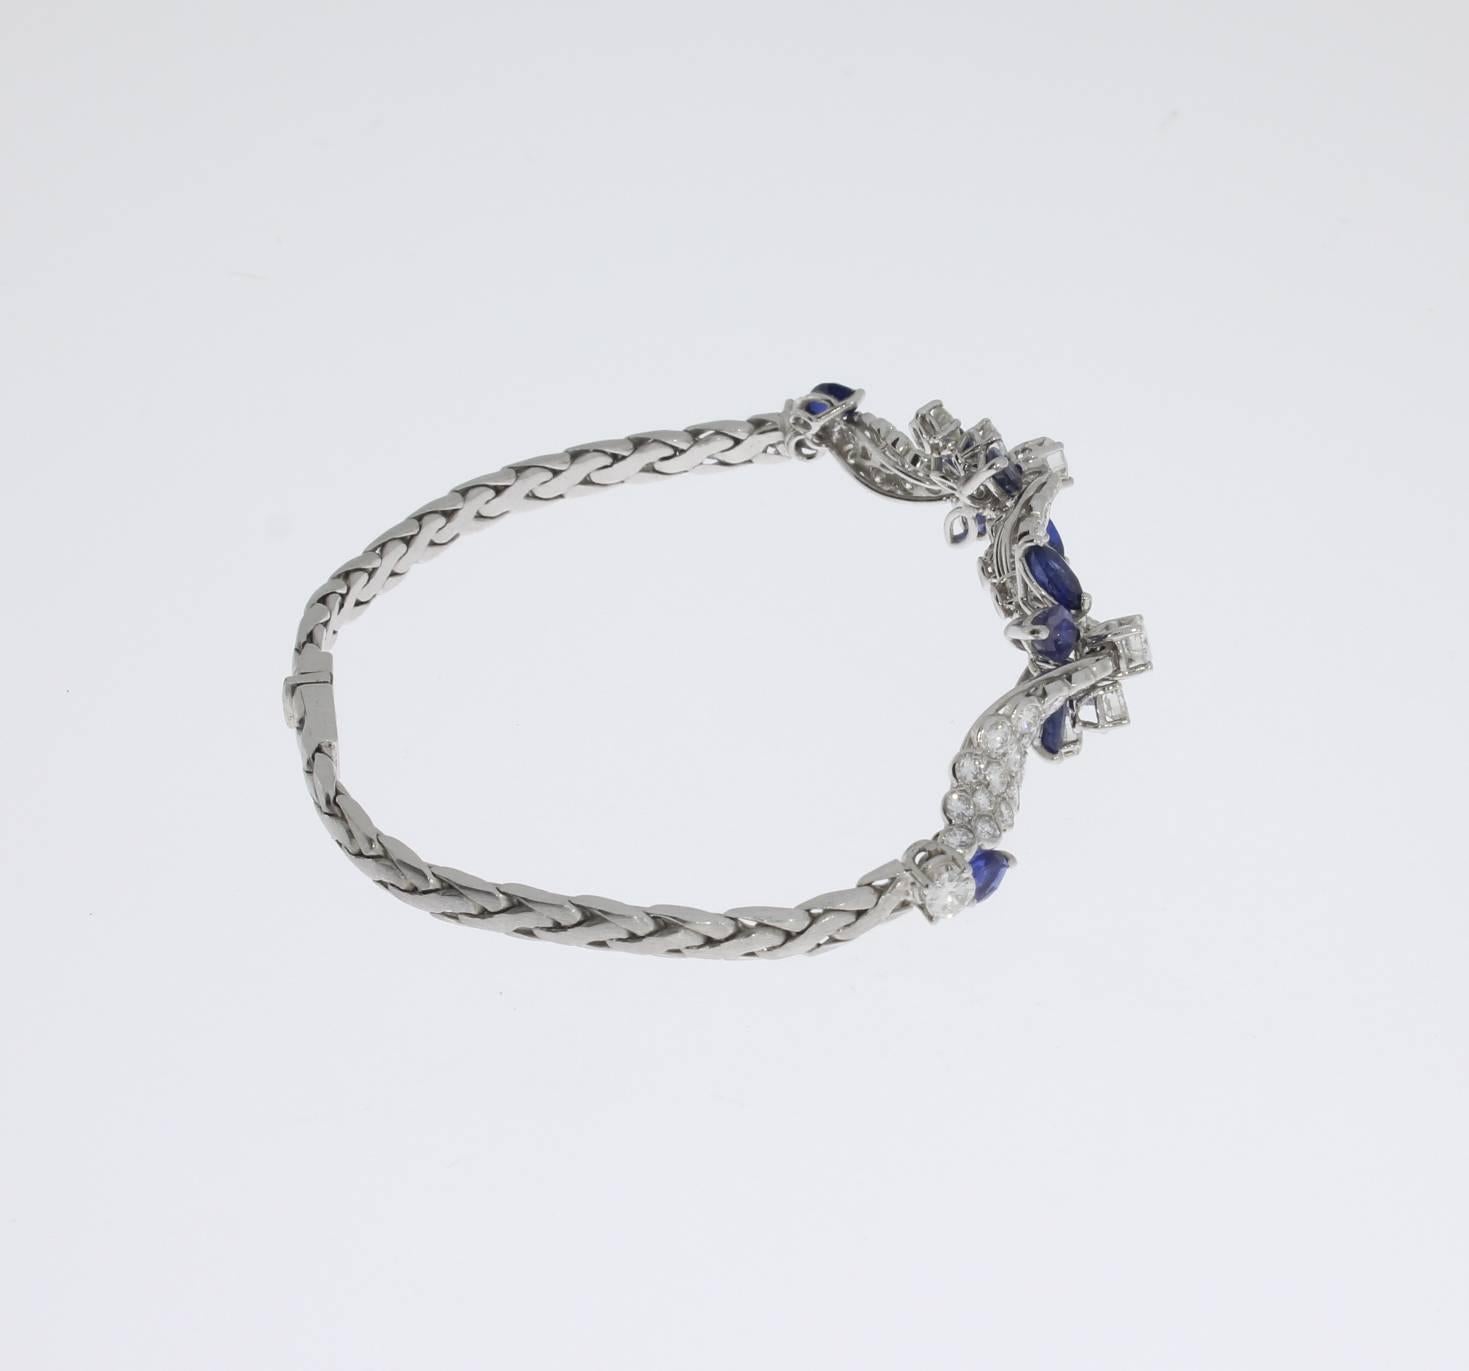 ca. 1985 by Jeweler Christ. Elegant bracelet in royal design with a classic combination of sapphires and diamonds. Set in 18 K white gold with 10 navette-cut sapphires with a total weight of 3 ,0 ct and 68 brilliant-cut diamonds with a total weight